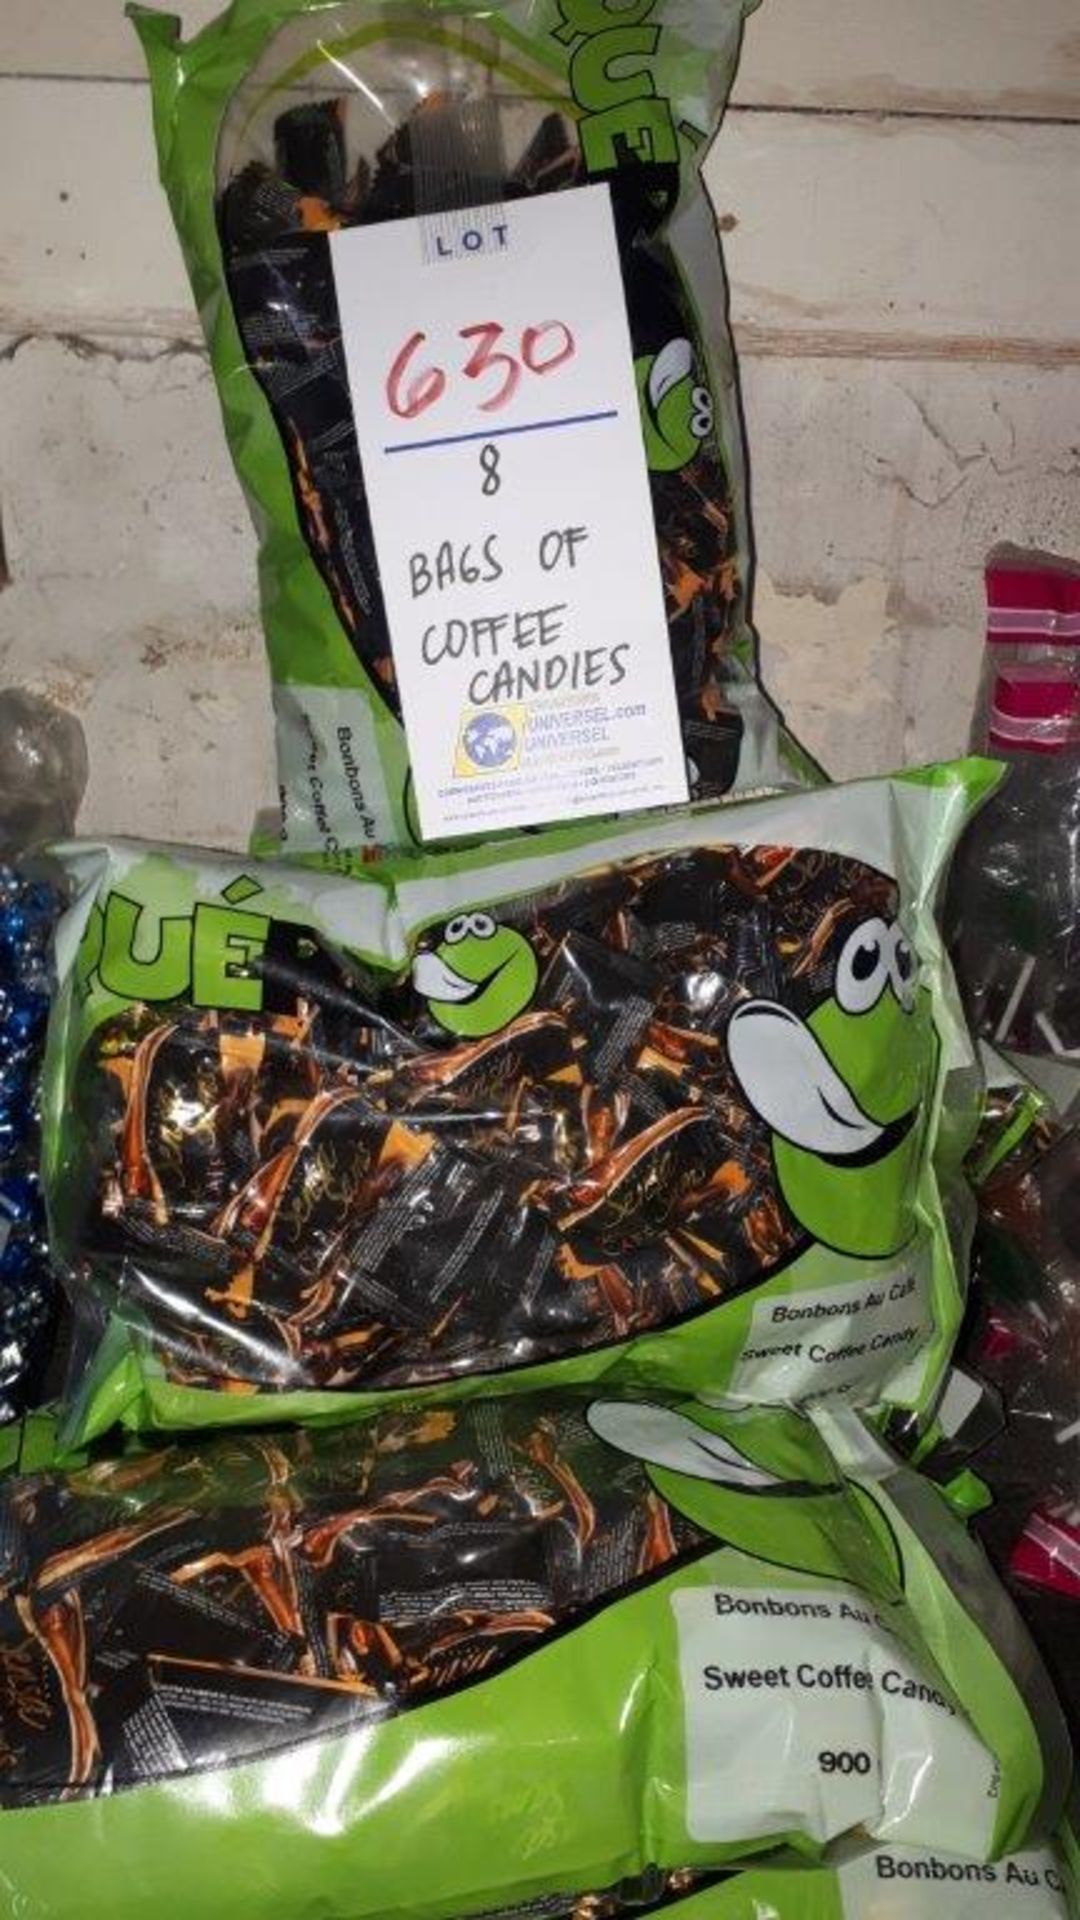 Bags of coffee candies